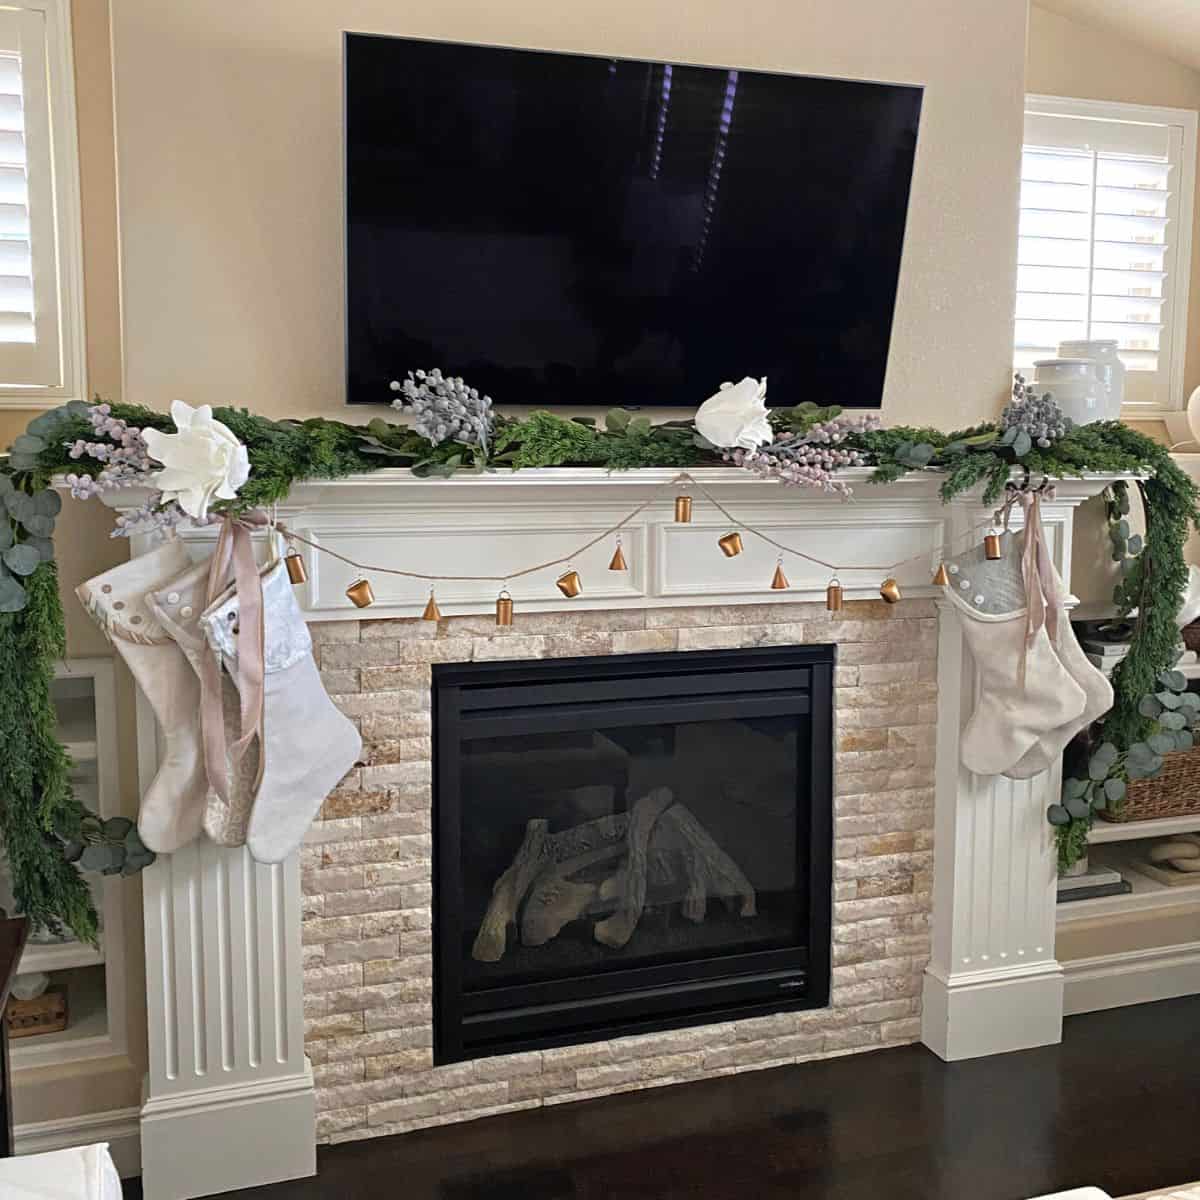 Fireplace mantel with pastel Christmas decorations